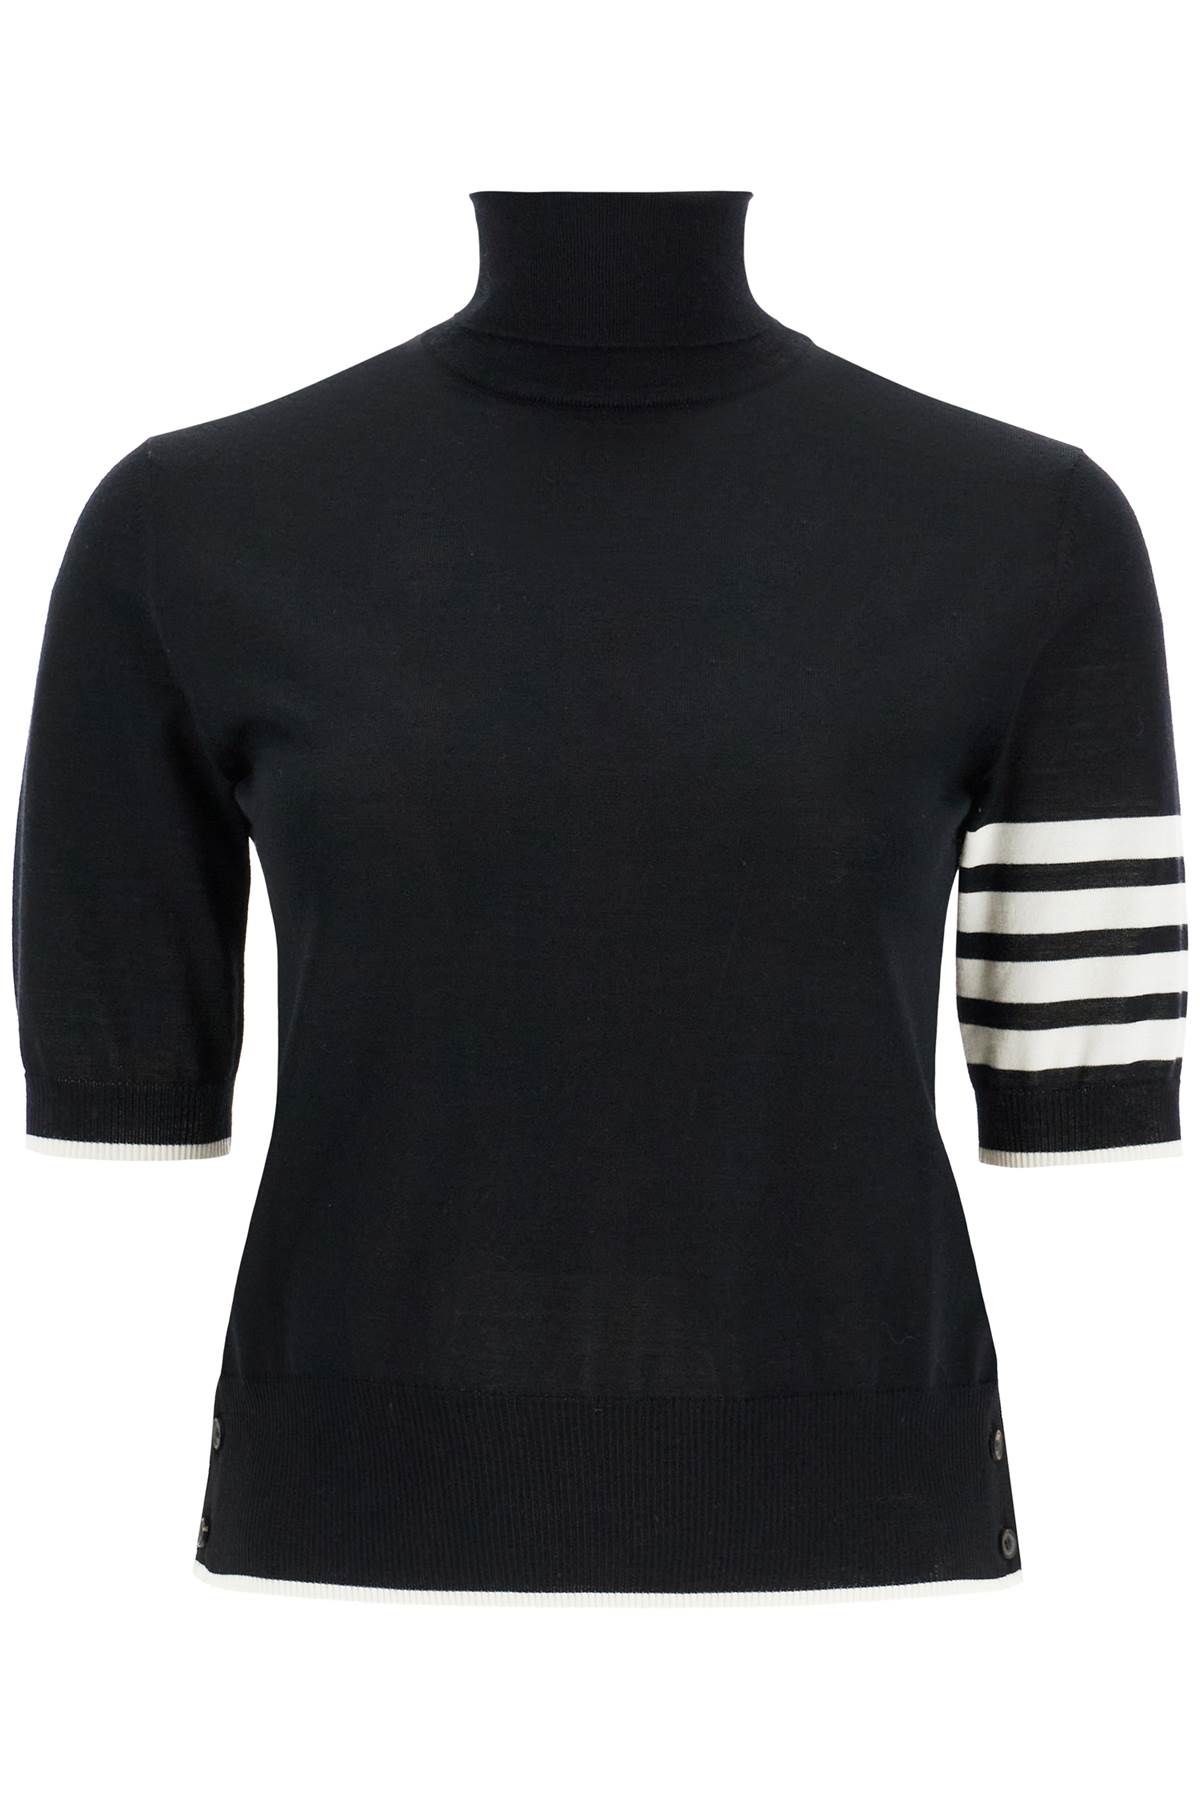 Thom Browne THOM BROWNE short-sleeved wool stretch sweater with a